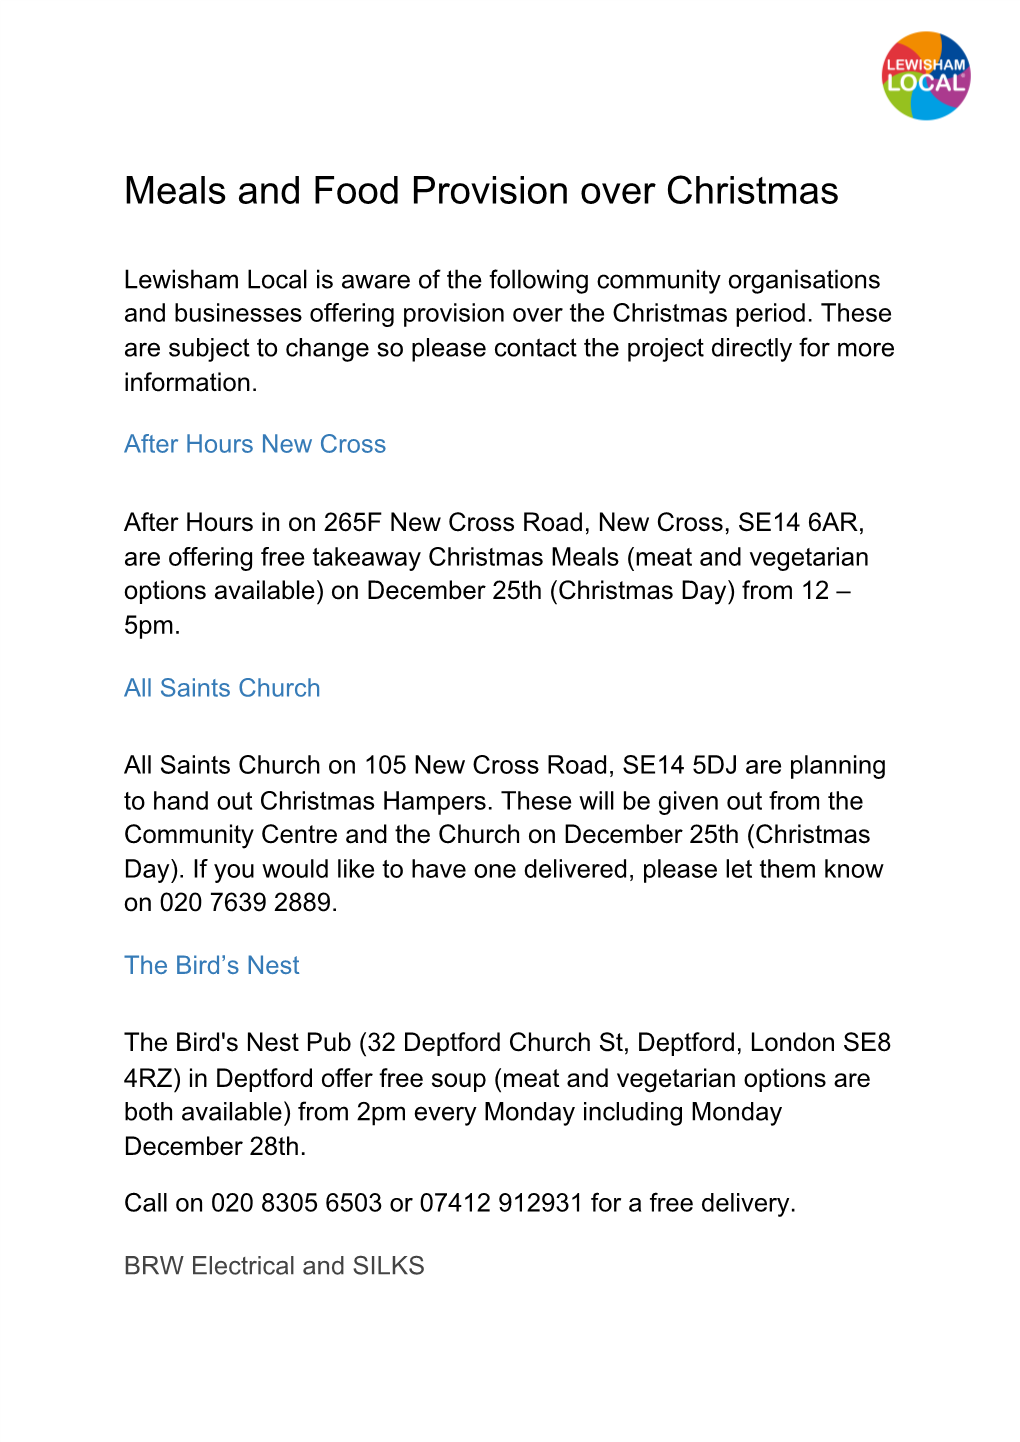 Meals and Food Provision Over Christmas